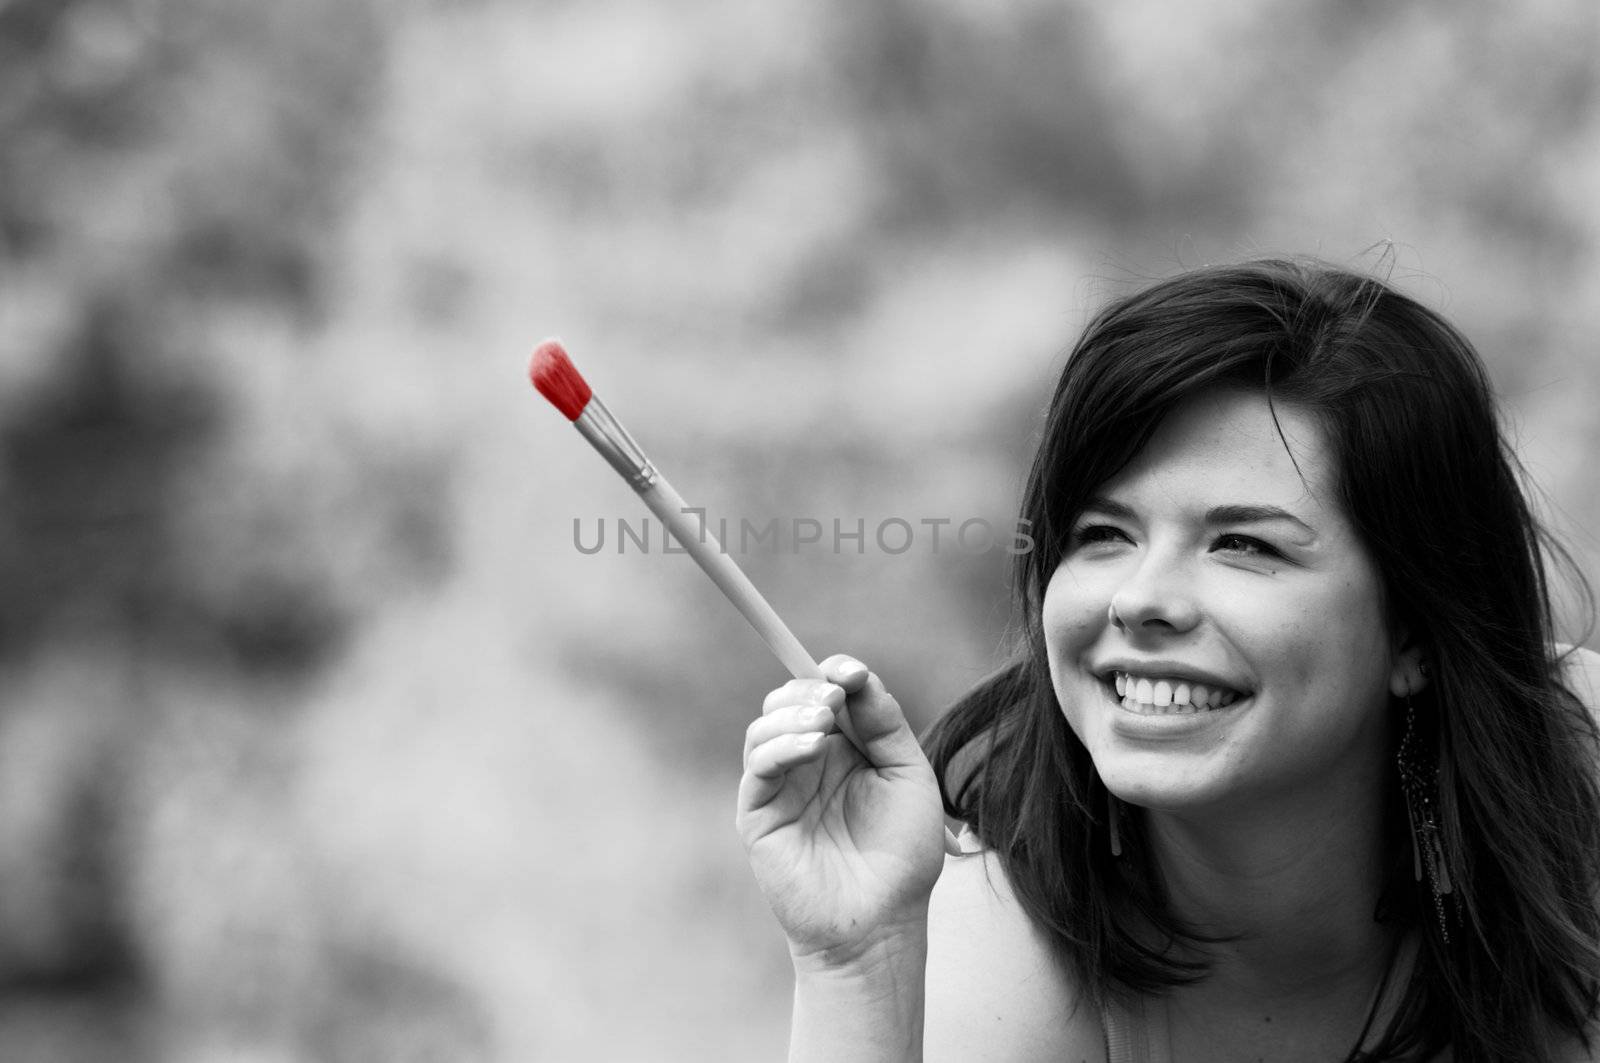 Painting the world. Smiling girl on grass with a paintbrush